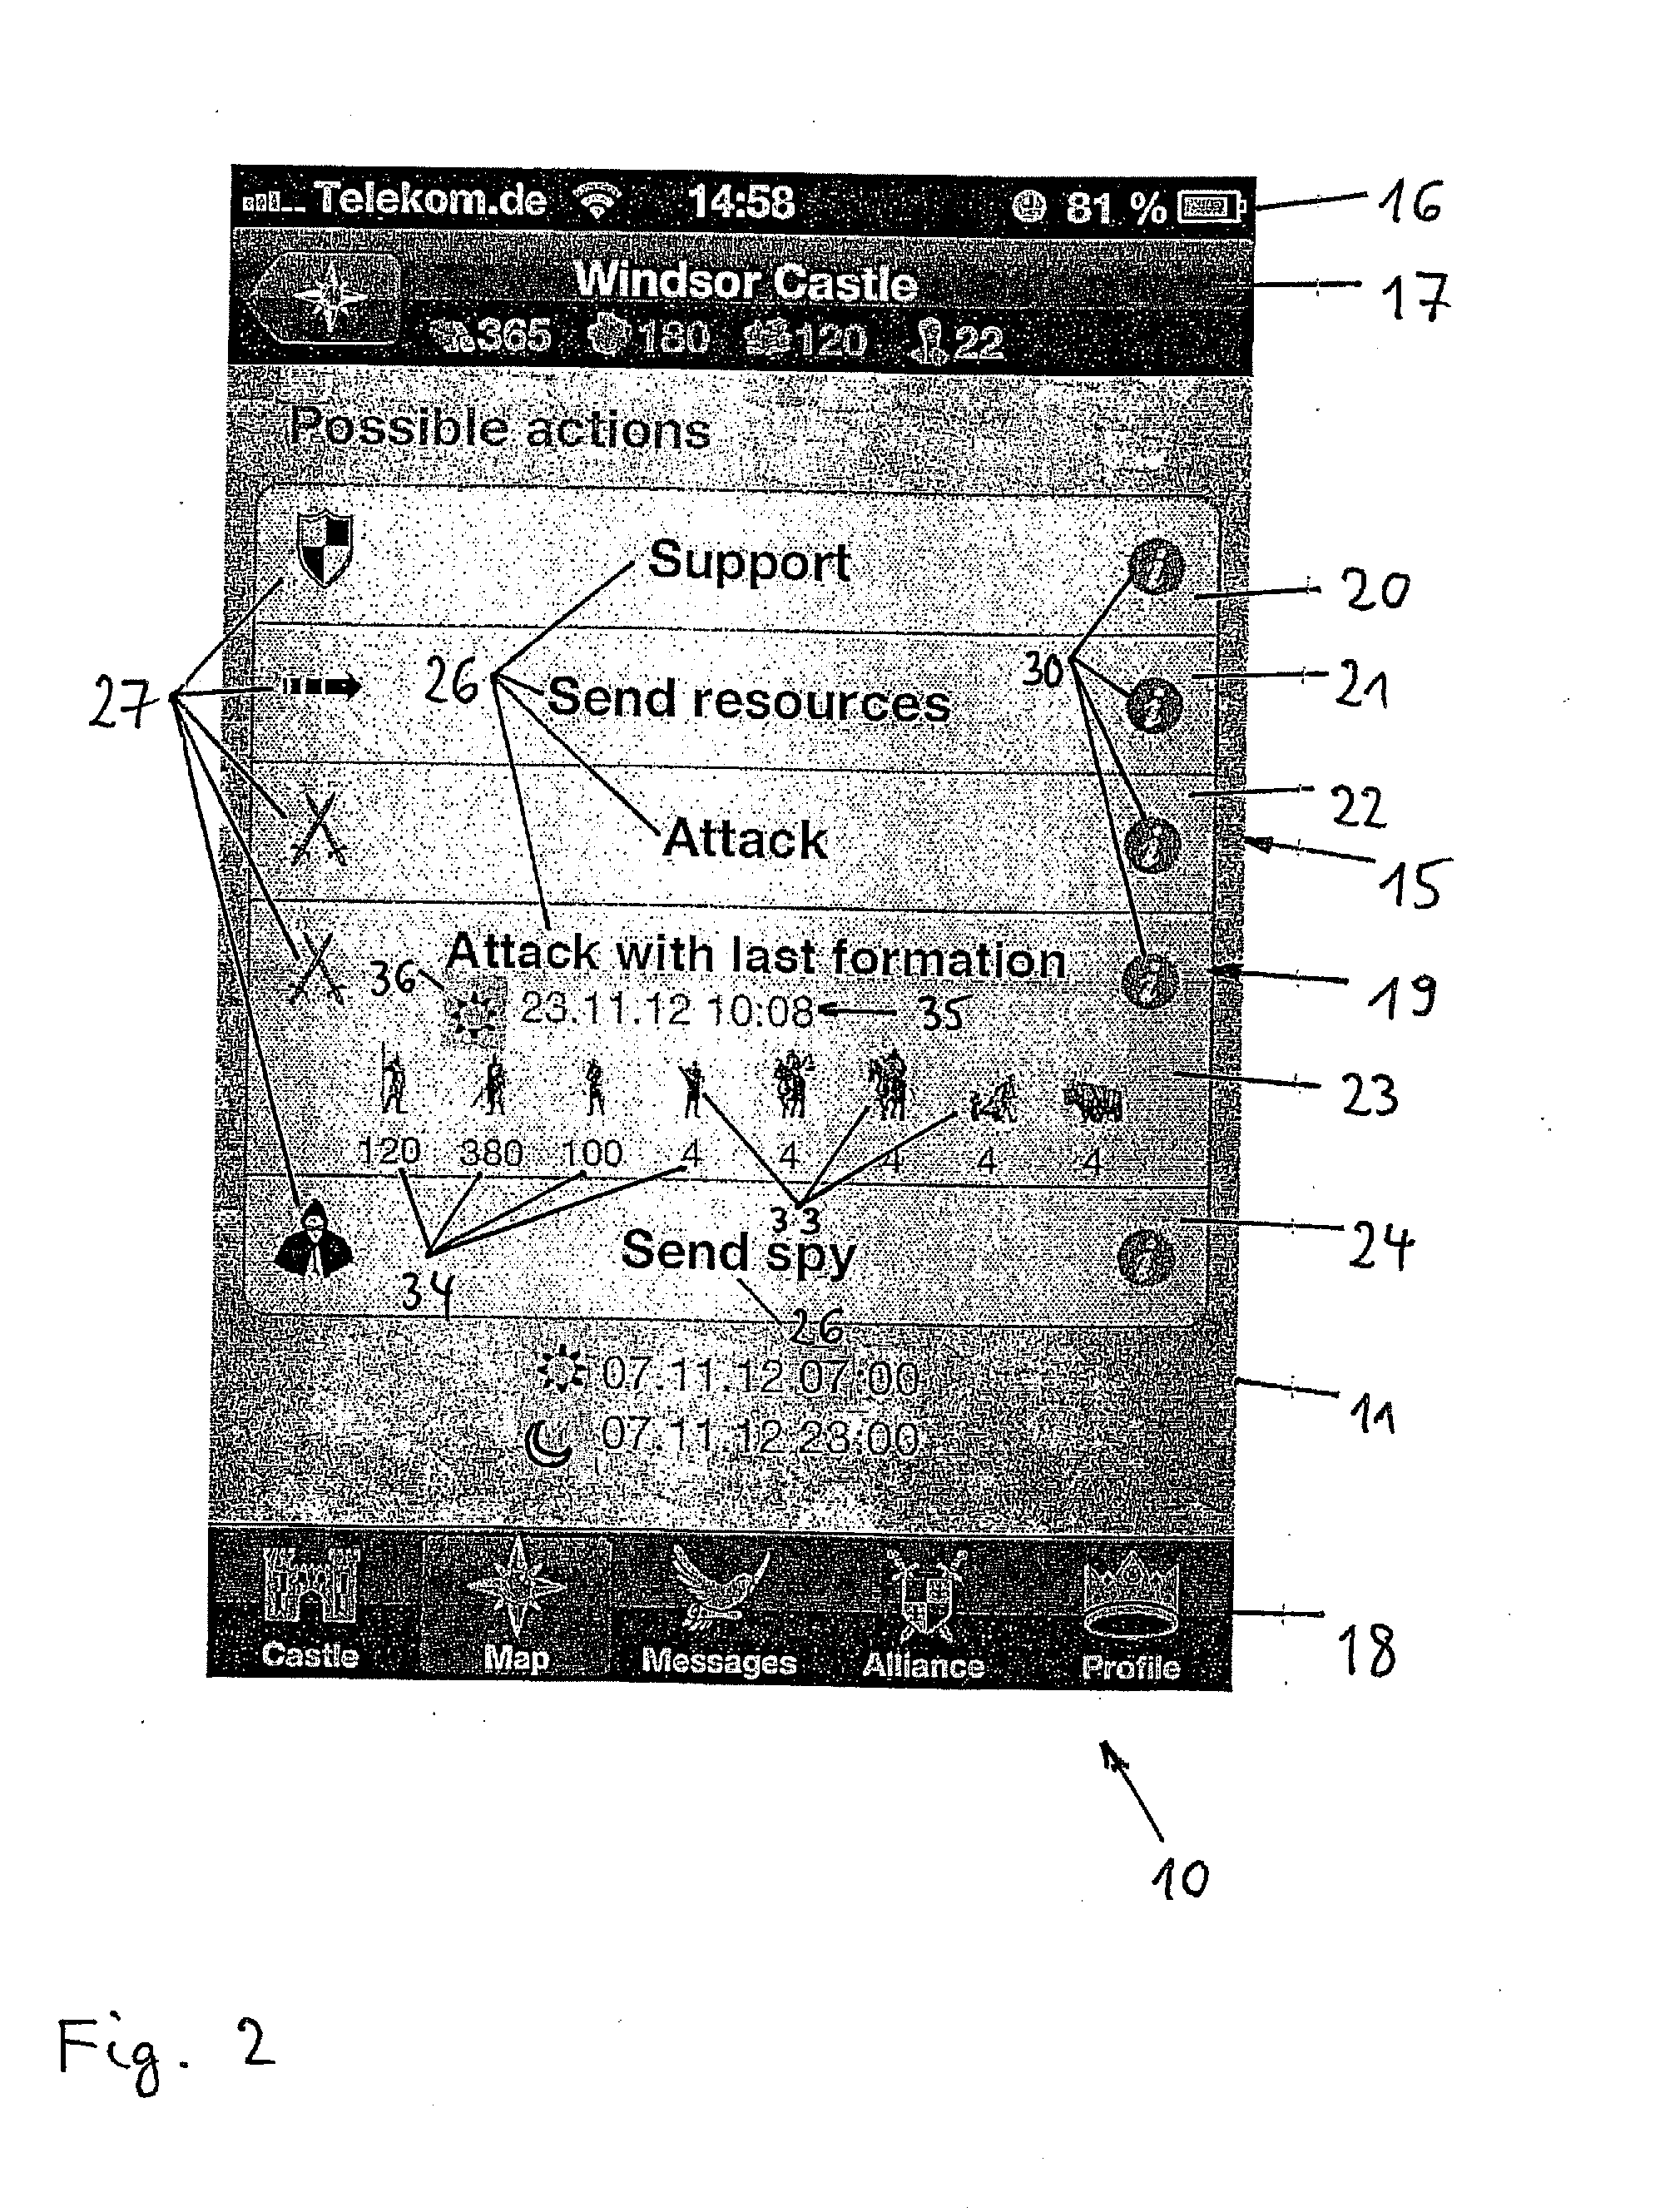 Graphical user interface, display apparatus and digital-electronic device